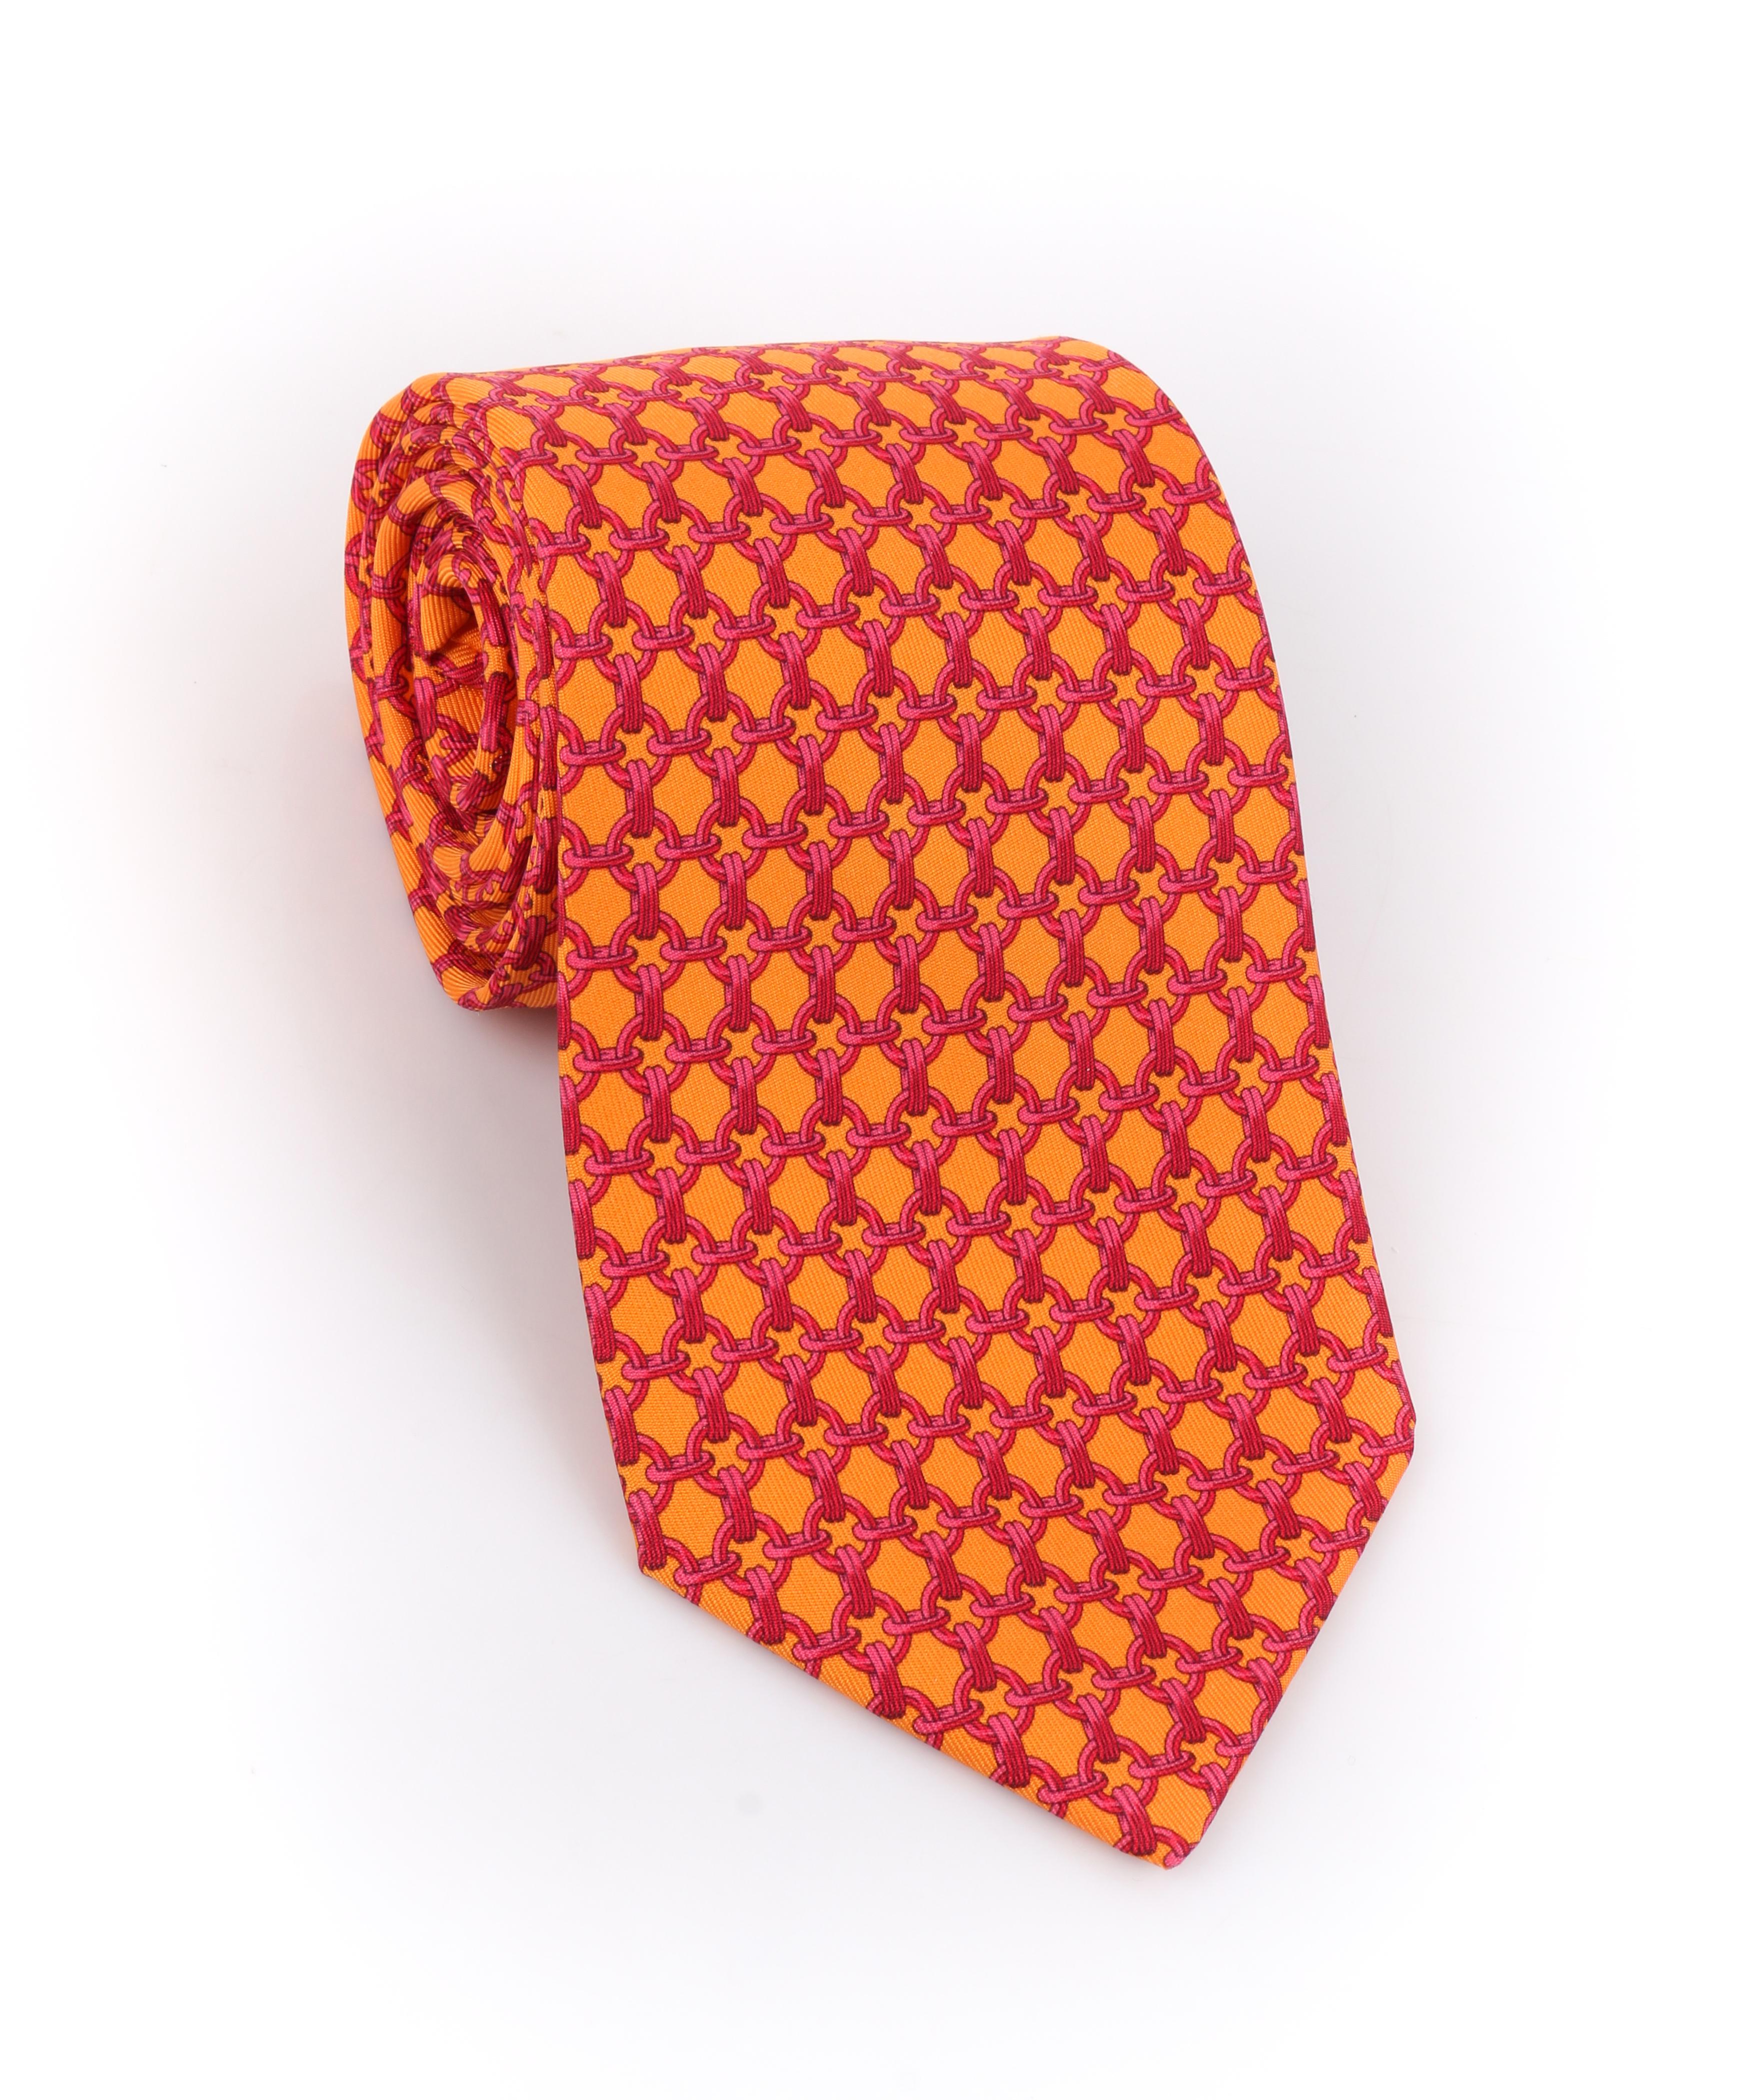 DESCRIPTION: HERMES Orange & Fuchsia Pink Chain Link Print 5 Fold Silk Necktie Tie 59 EA
 
Brand / Manufacturer: Hermes
Style: 5 fold necktie
Color(s): Shades of orange and fuchsia pink
Lined: Yes
Marked Fabric Content: 100% Silk 
Additional Details